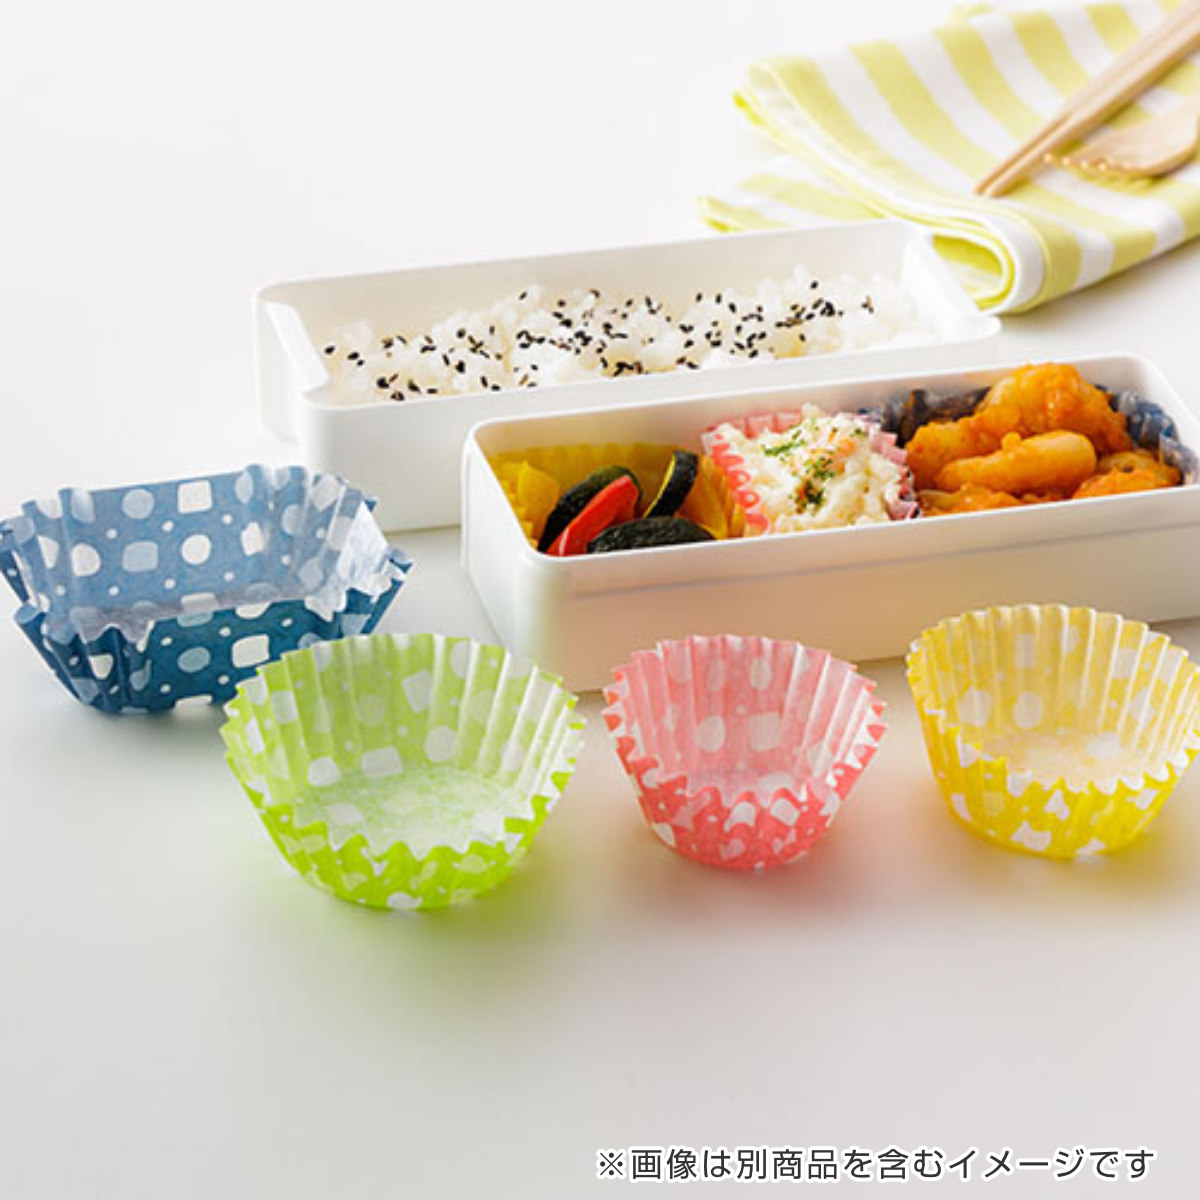  side dish cup 102 sheets entering .. oil ..... cup M size profit for (.. present cup 102 piece entering high capacity side dish inserting . present child . water made in Japan )